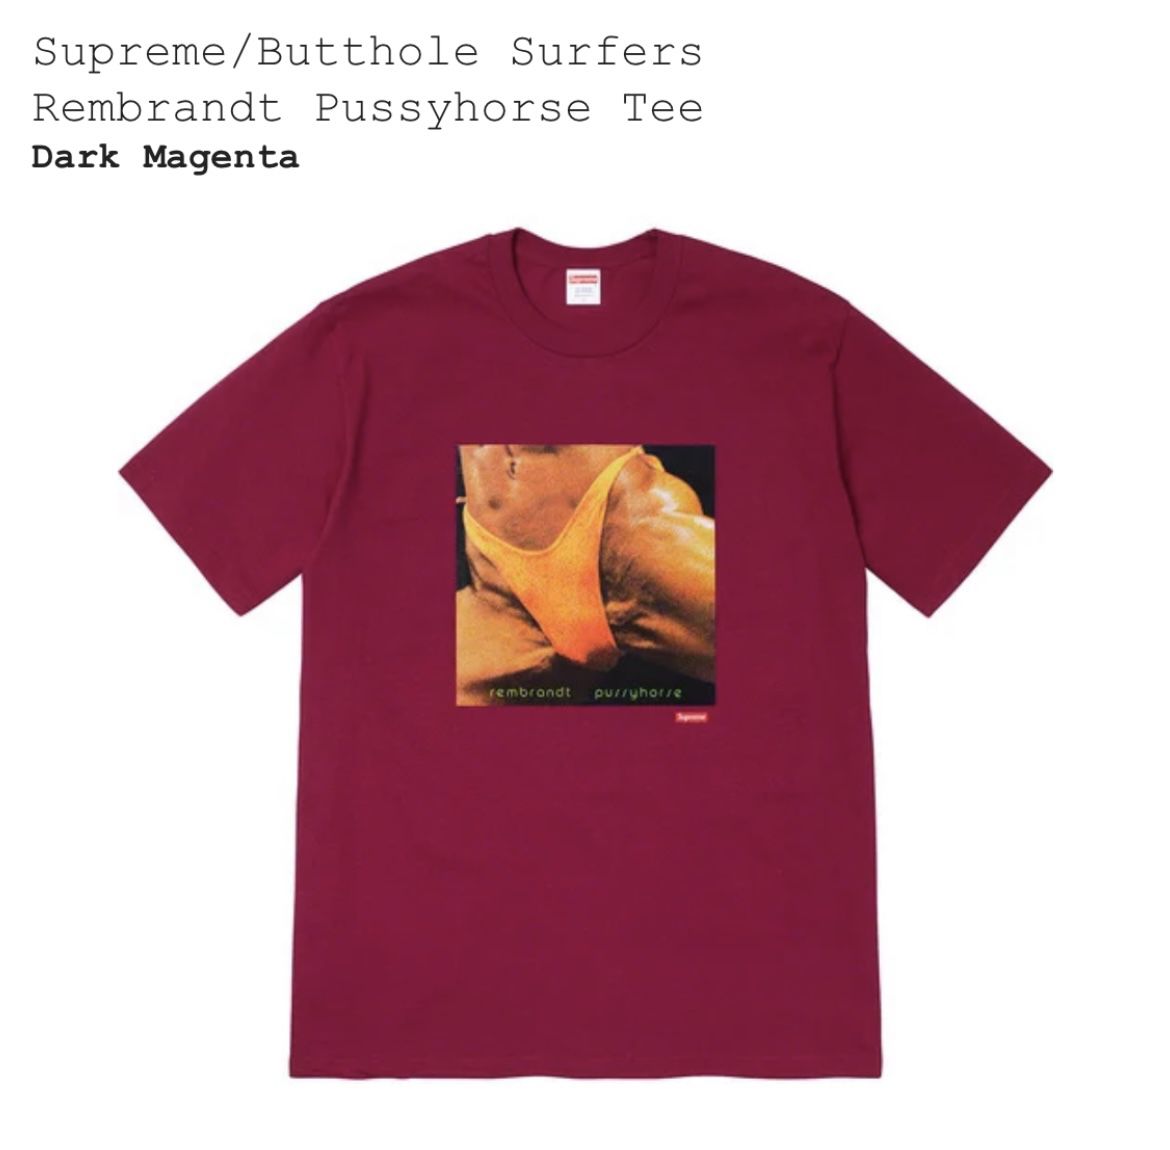 Supreme X Butt Hole Surfers Collaboration Tee